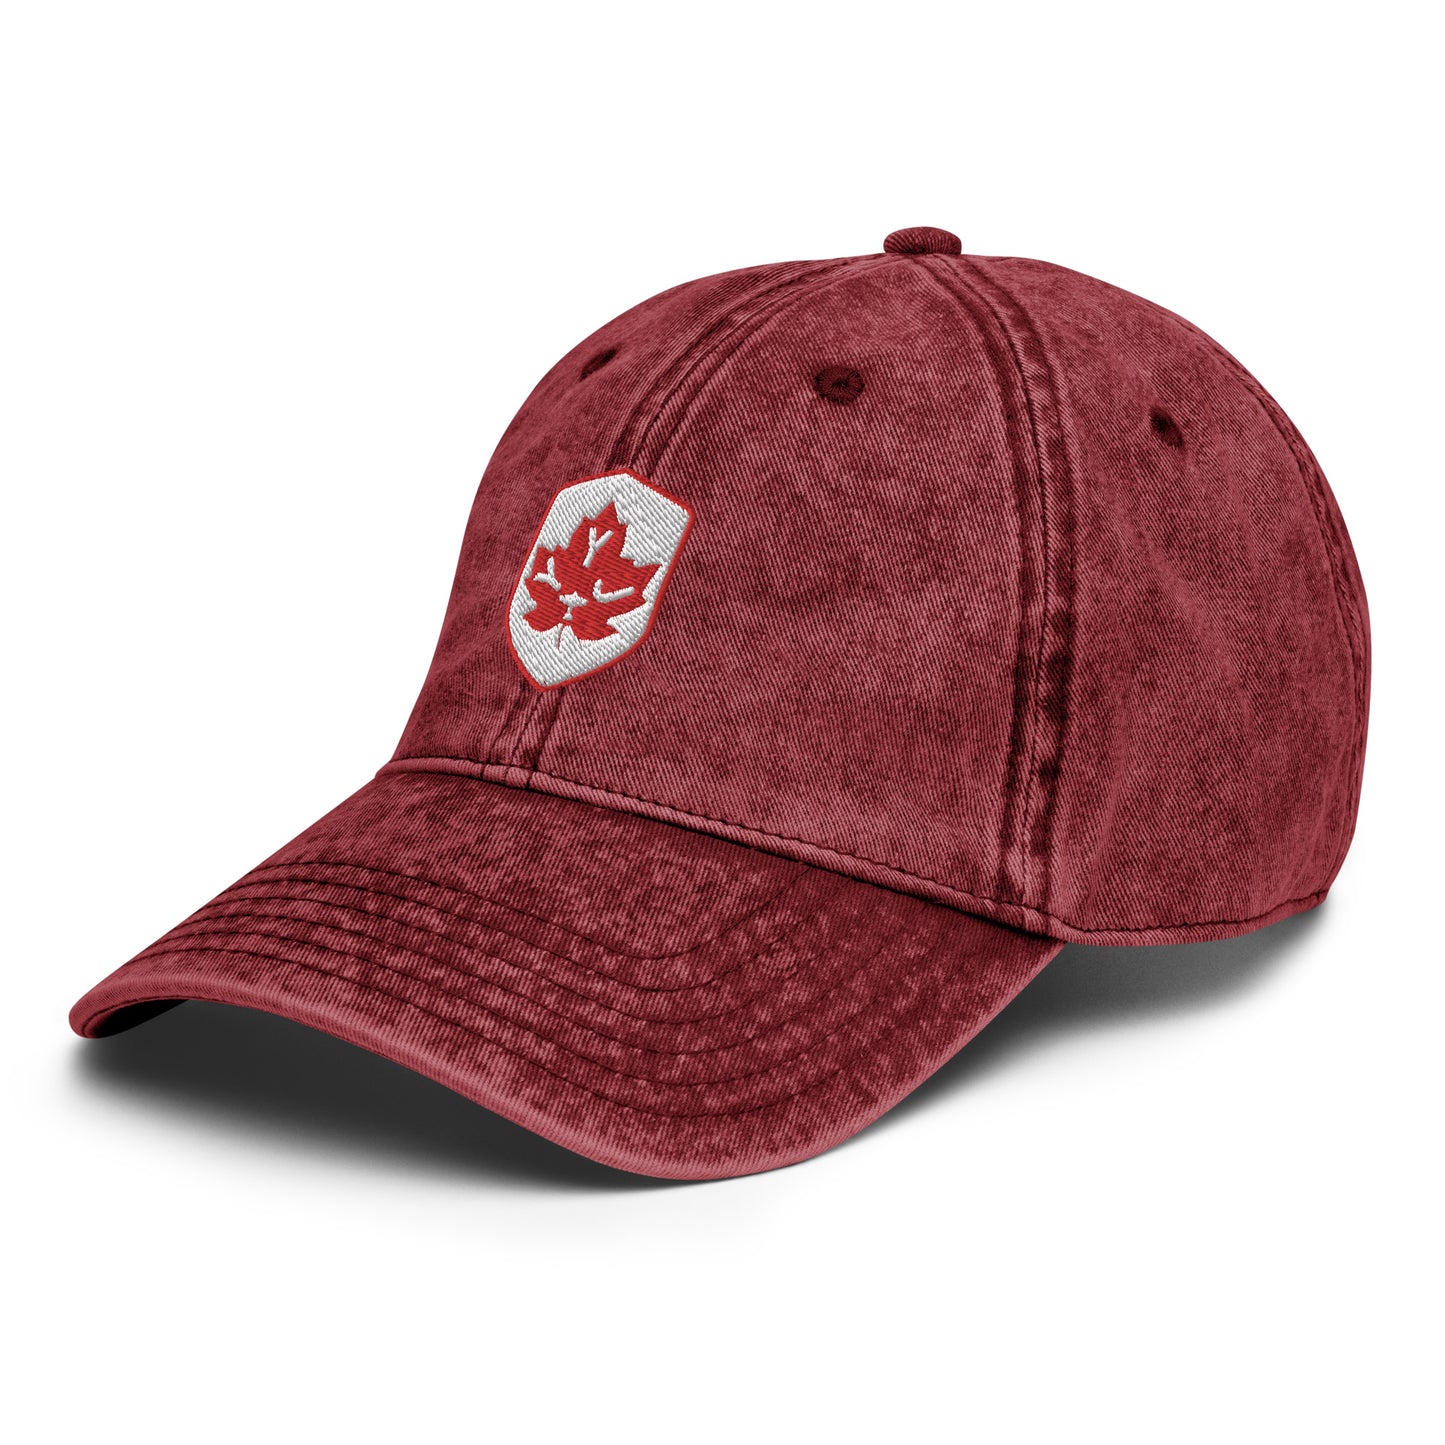 Maple Leaf Twill Cap - Red/White • YYJ Victoria • YHM Designs - Image 18